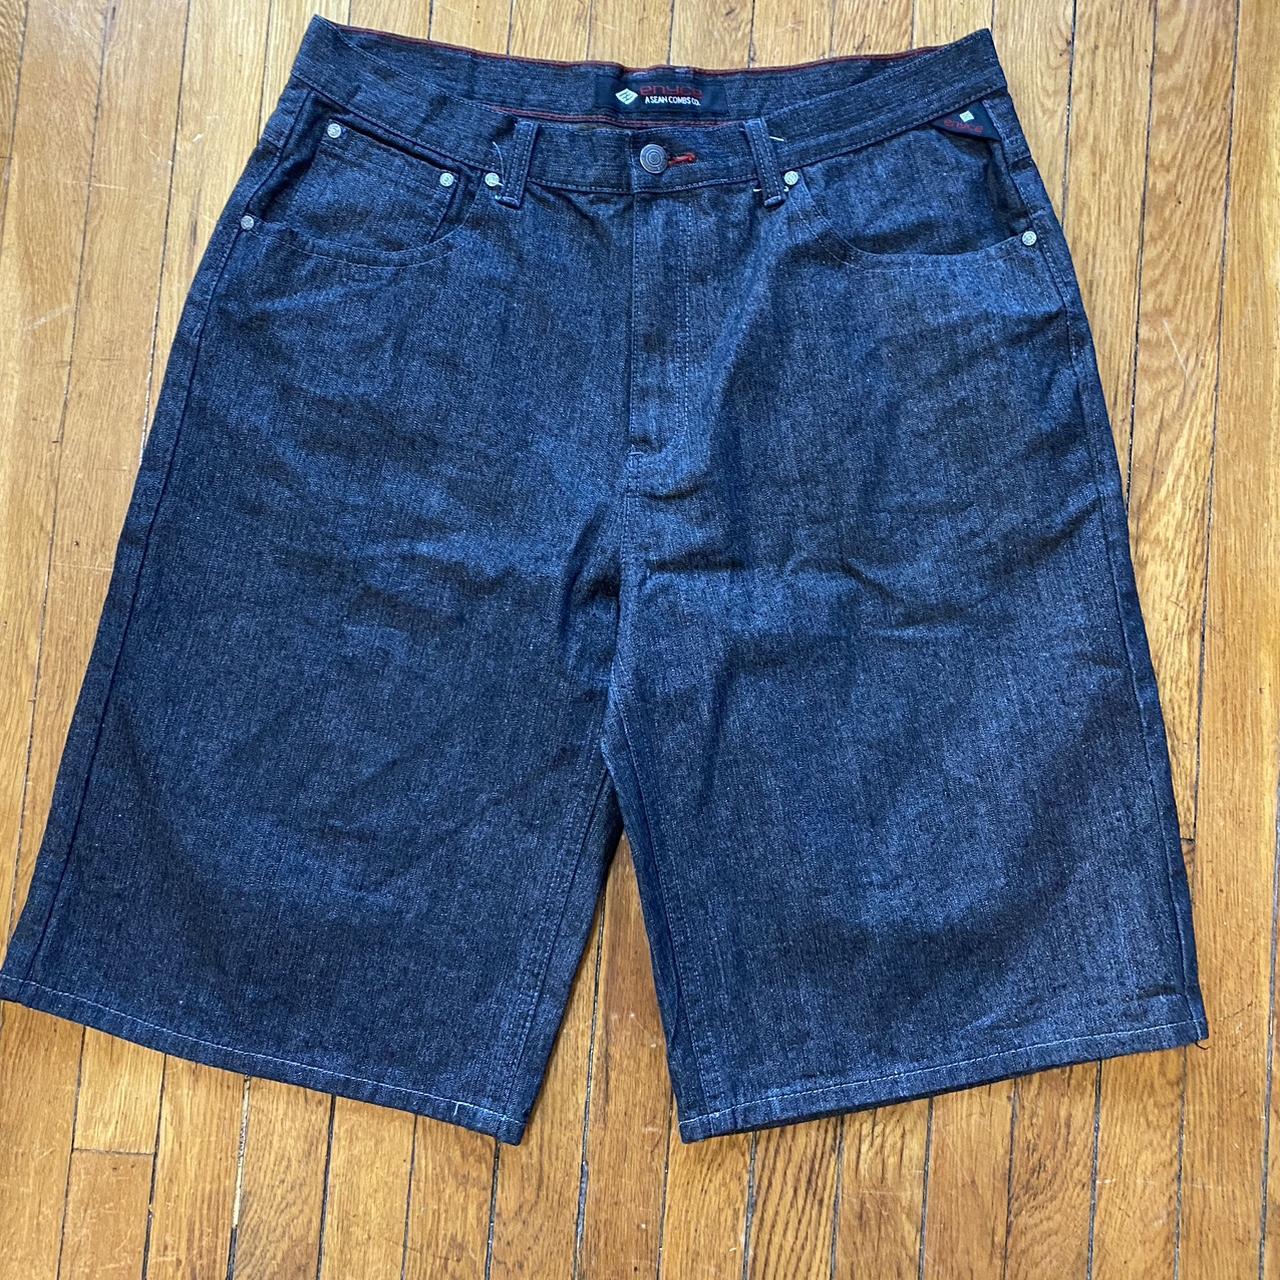 Vintage early 2000s enyce jorts size 40 baggy fit... - Depop